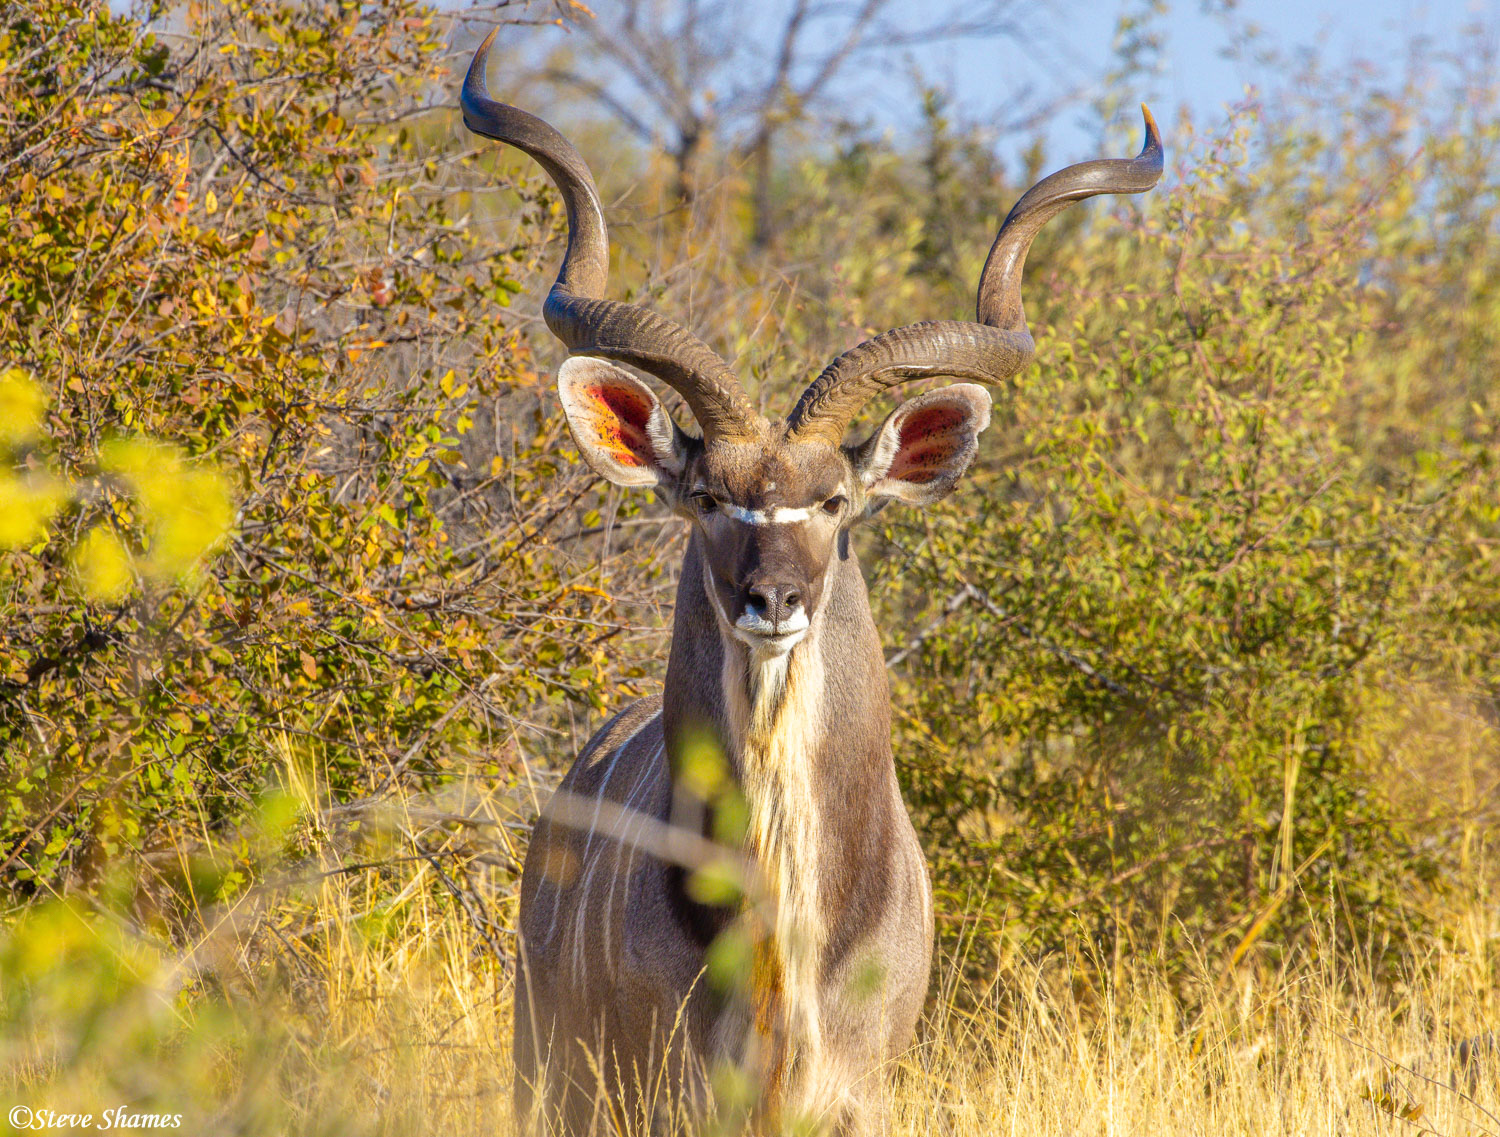 I like the double twisting horns on the male kudus.